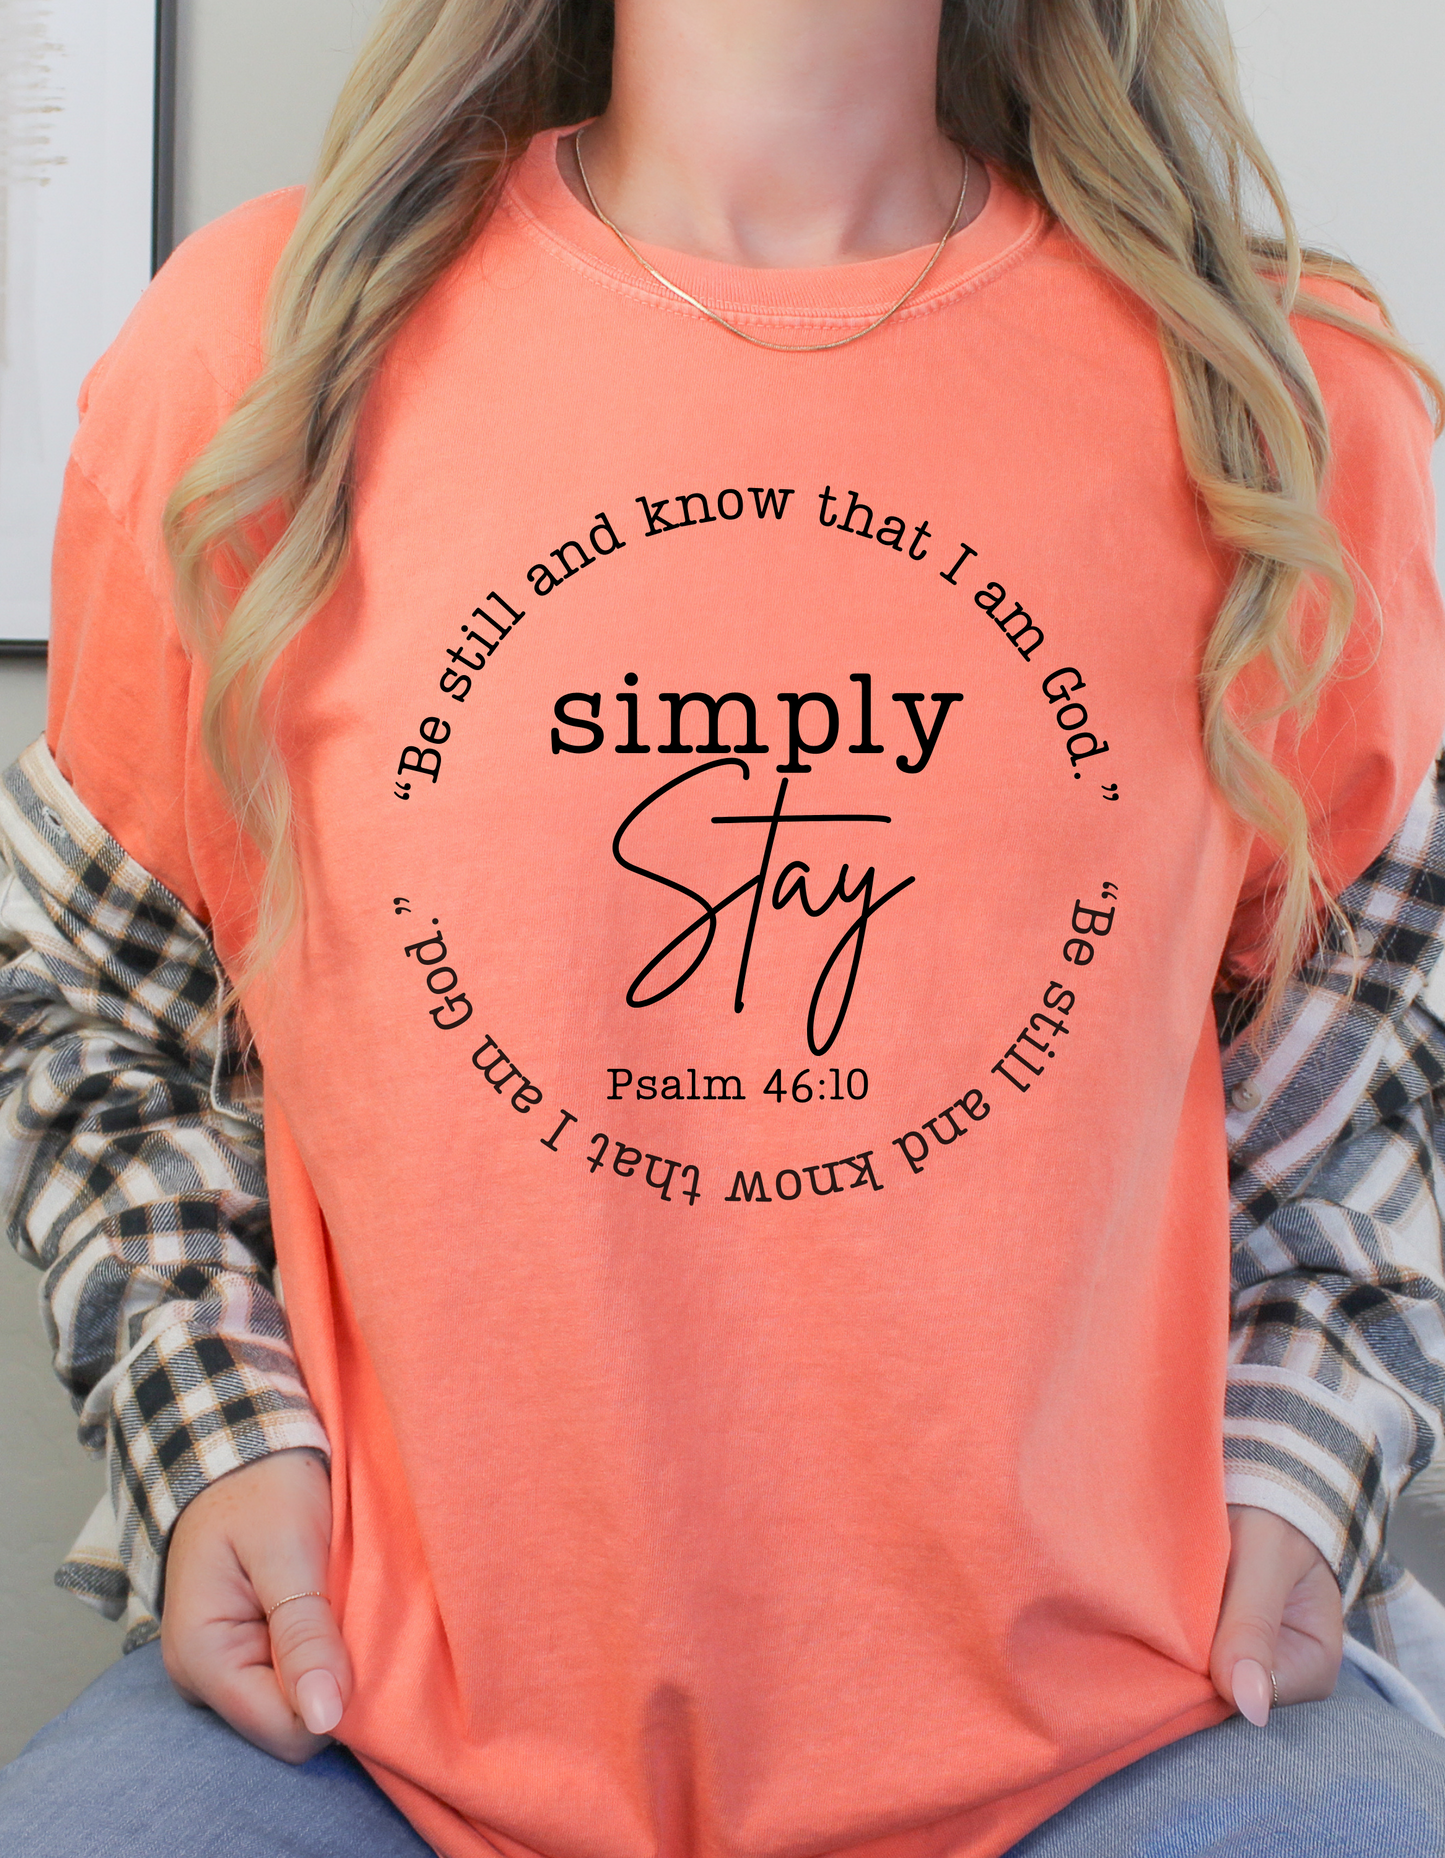 Simply Stay by Simply me